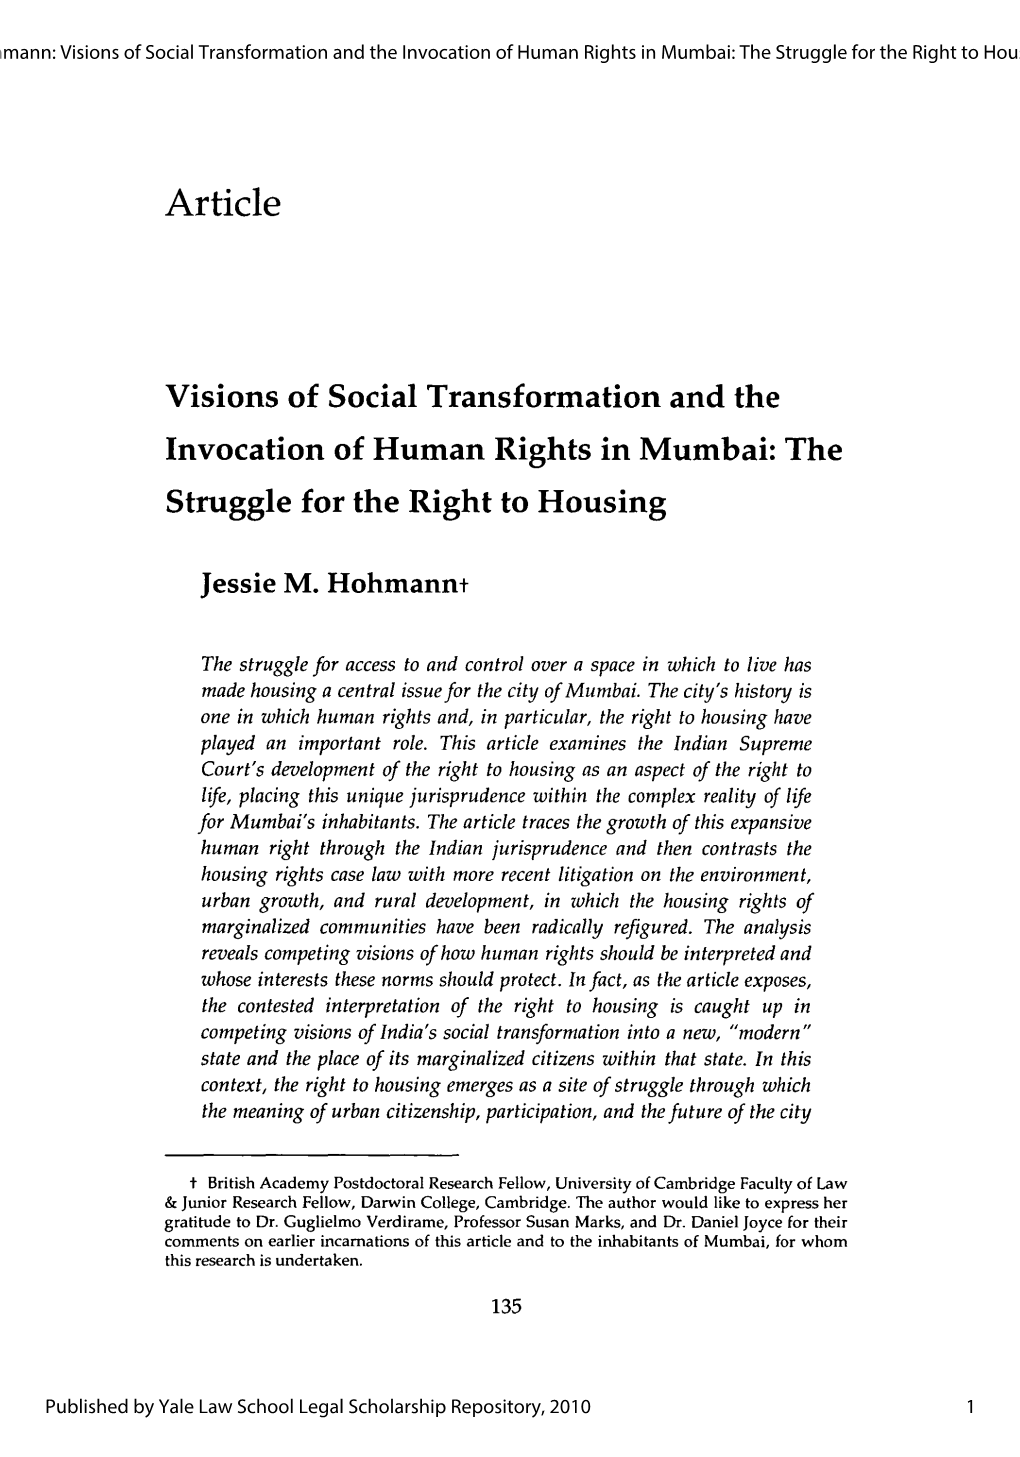 Visions of Social Transformation and the Invocation of Human Rights in Mumbai: the Struggle for the Right to Housing